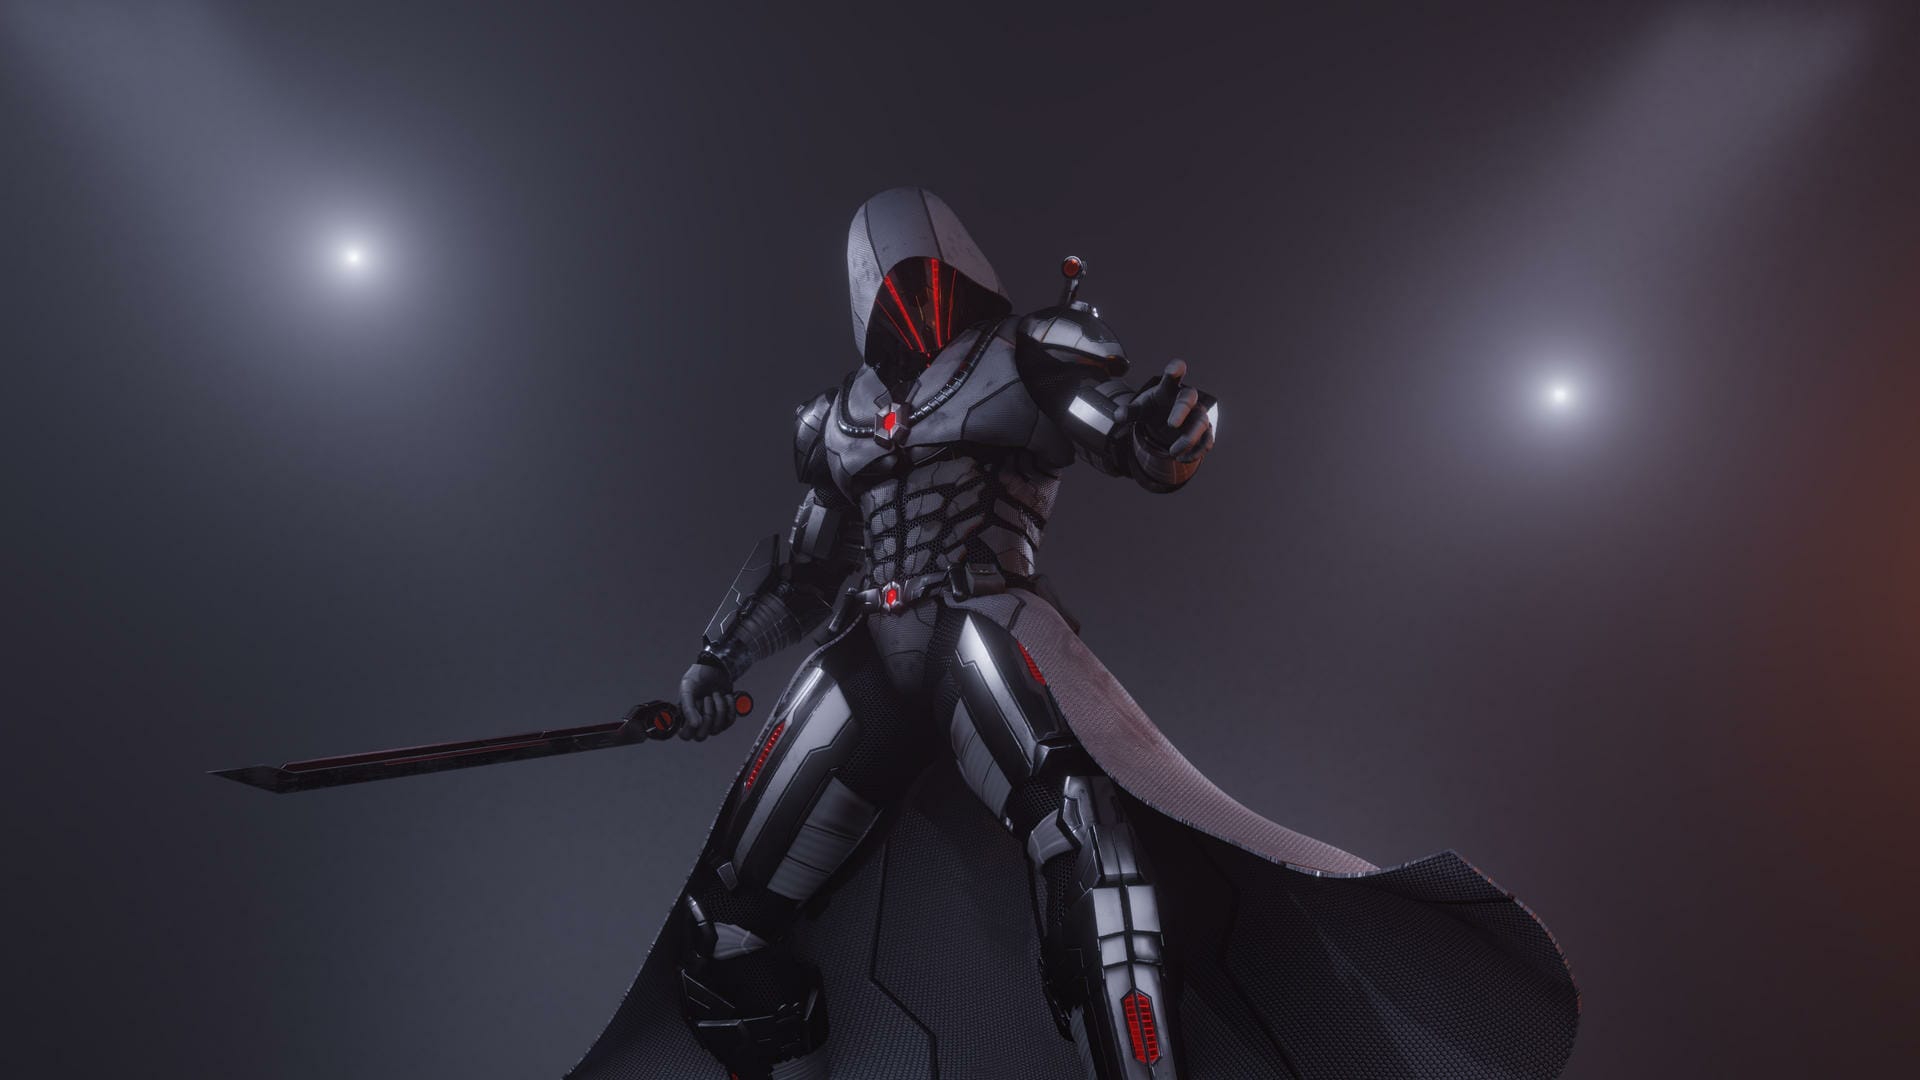 The Cyborg Assassin 2 by CyberWave164